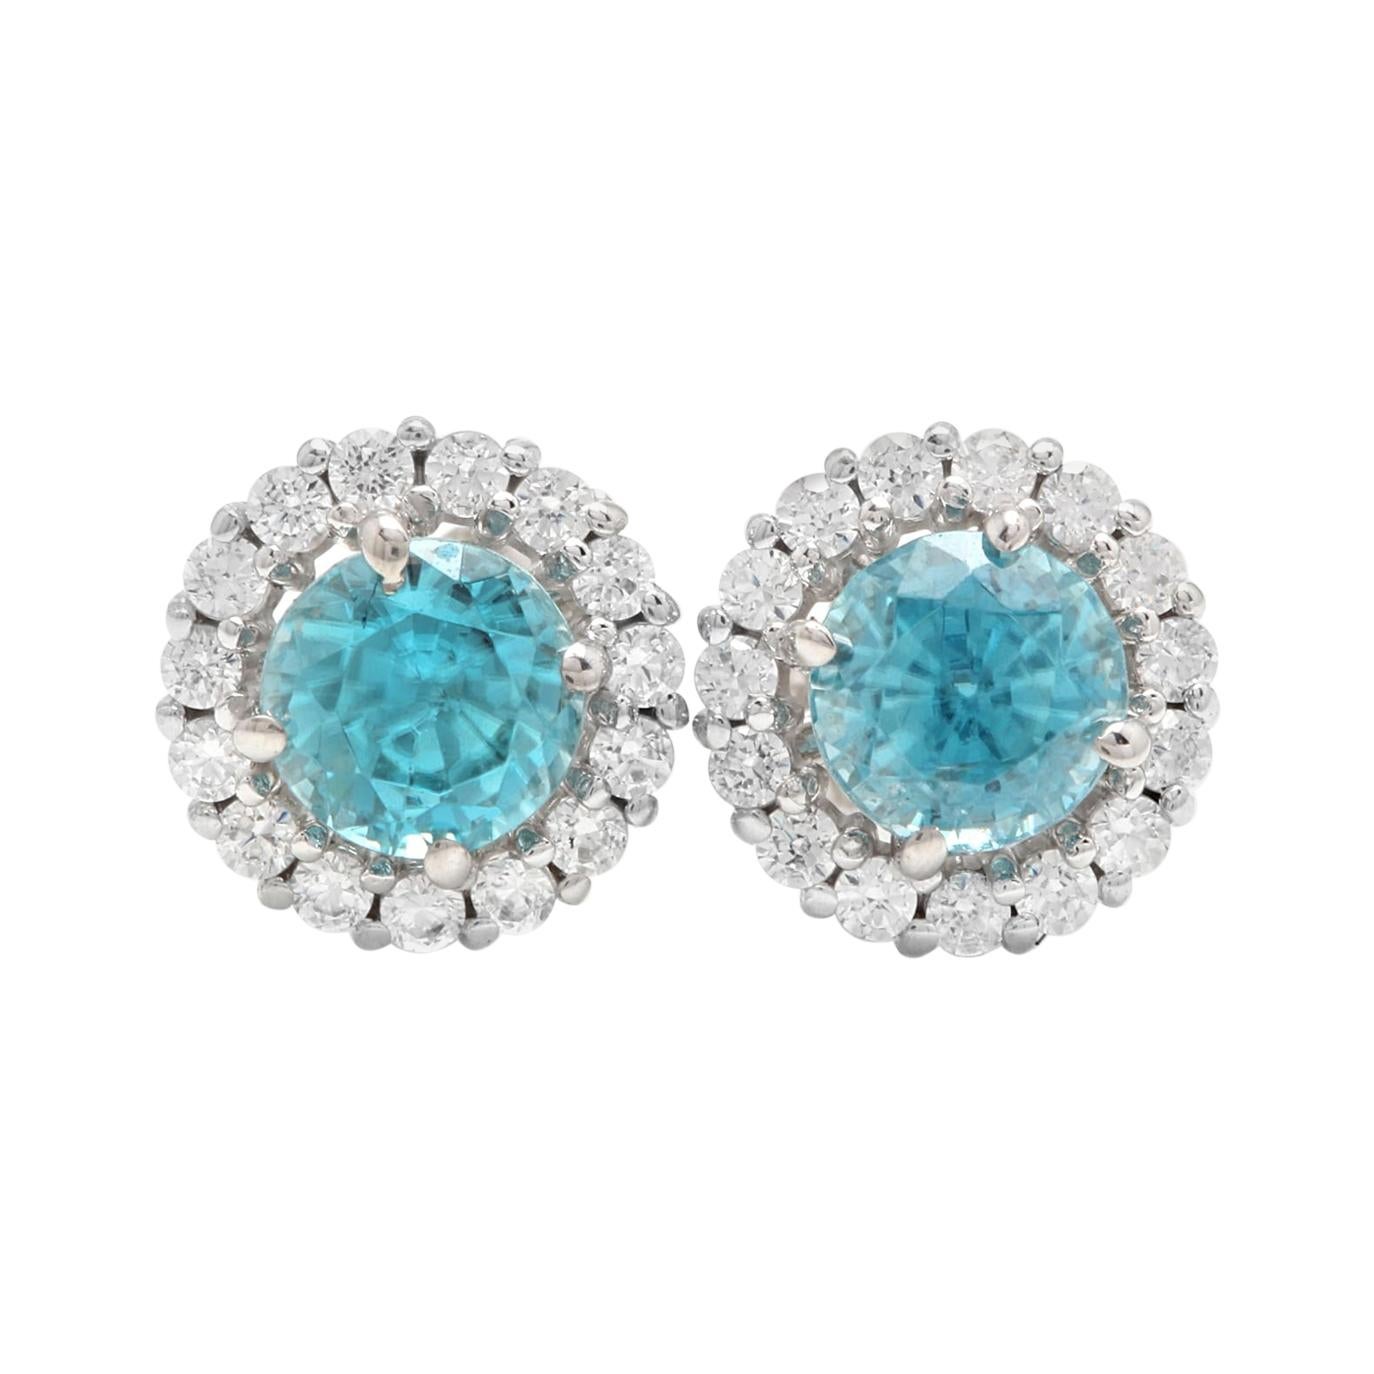 2.25 Carat Natural Zircon and Diamond 14 Karat Solid White Gold Earrings For Sale